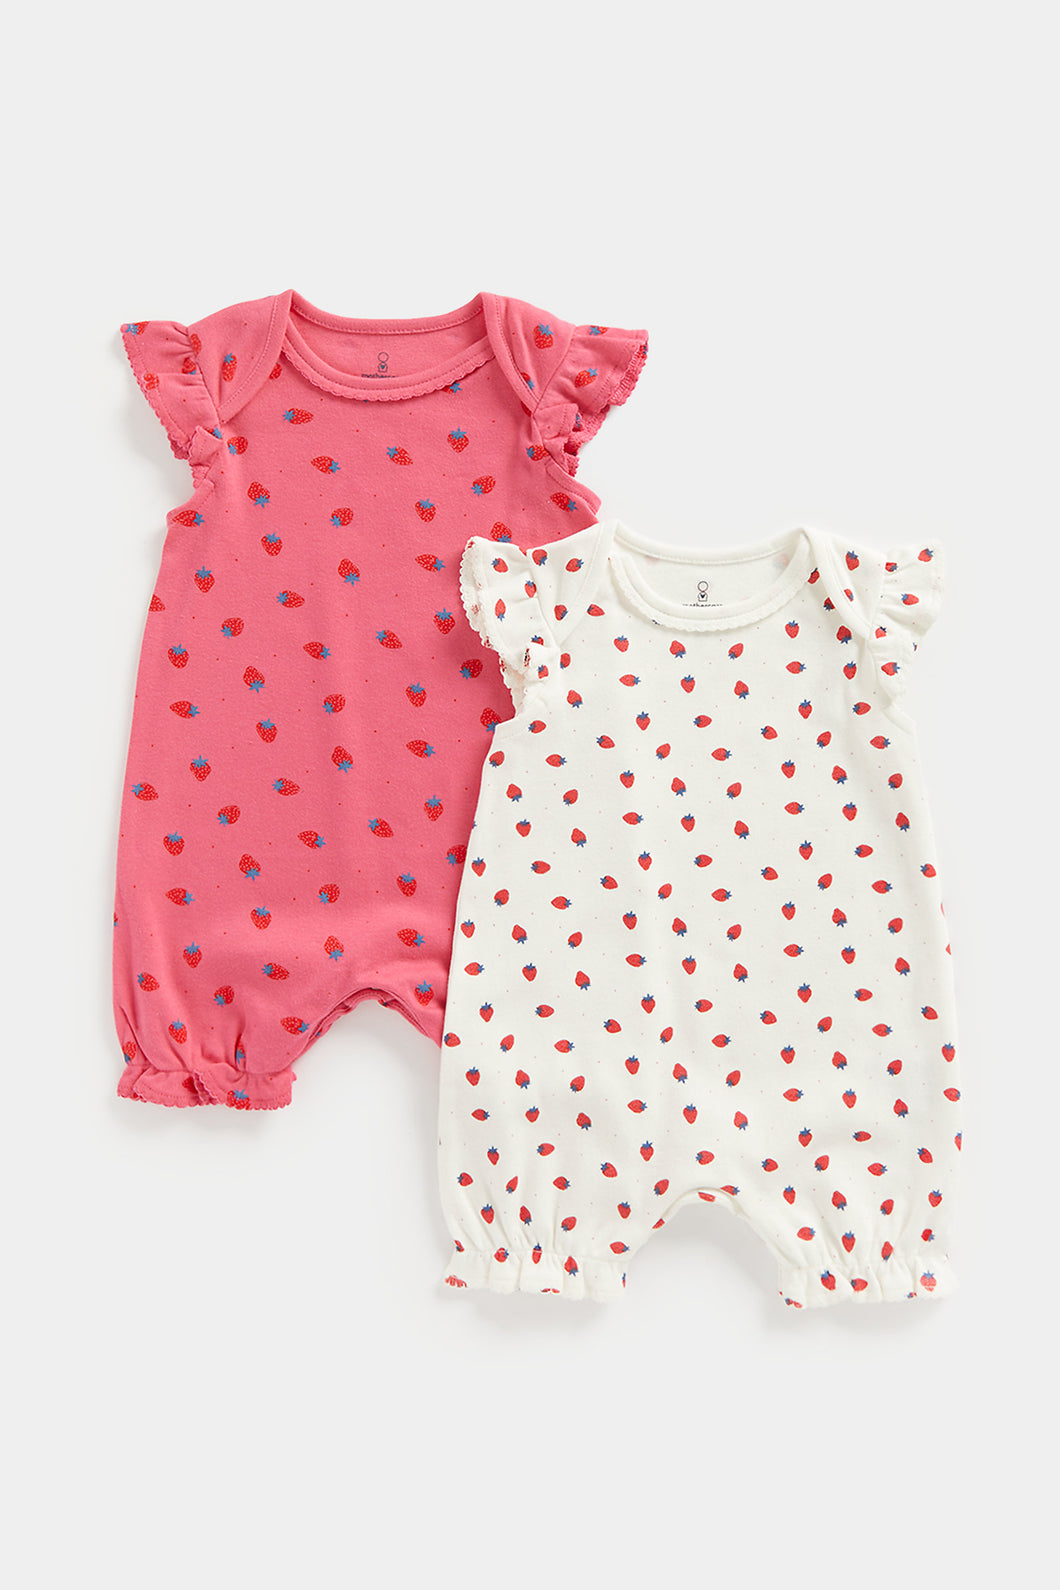 Mothercare Strawberry Rompers - 2 Pack